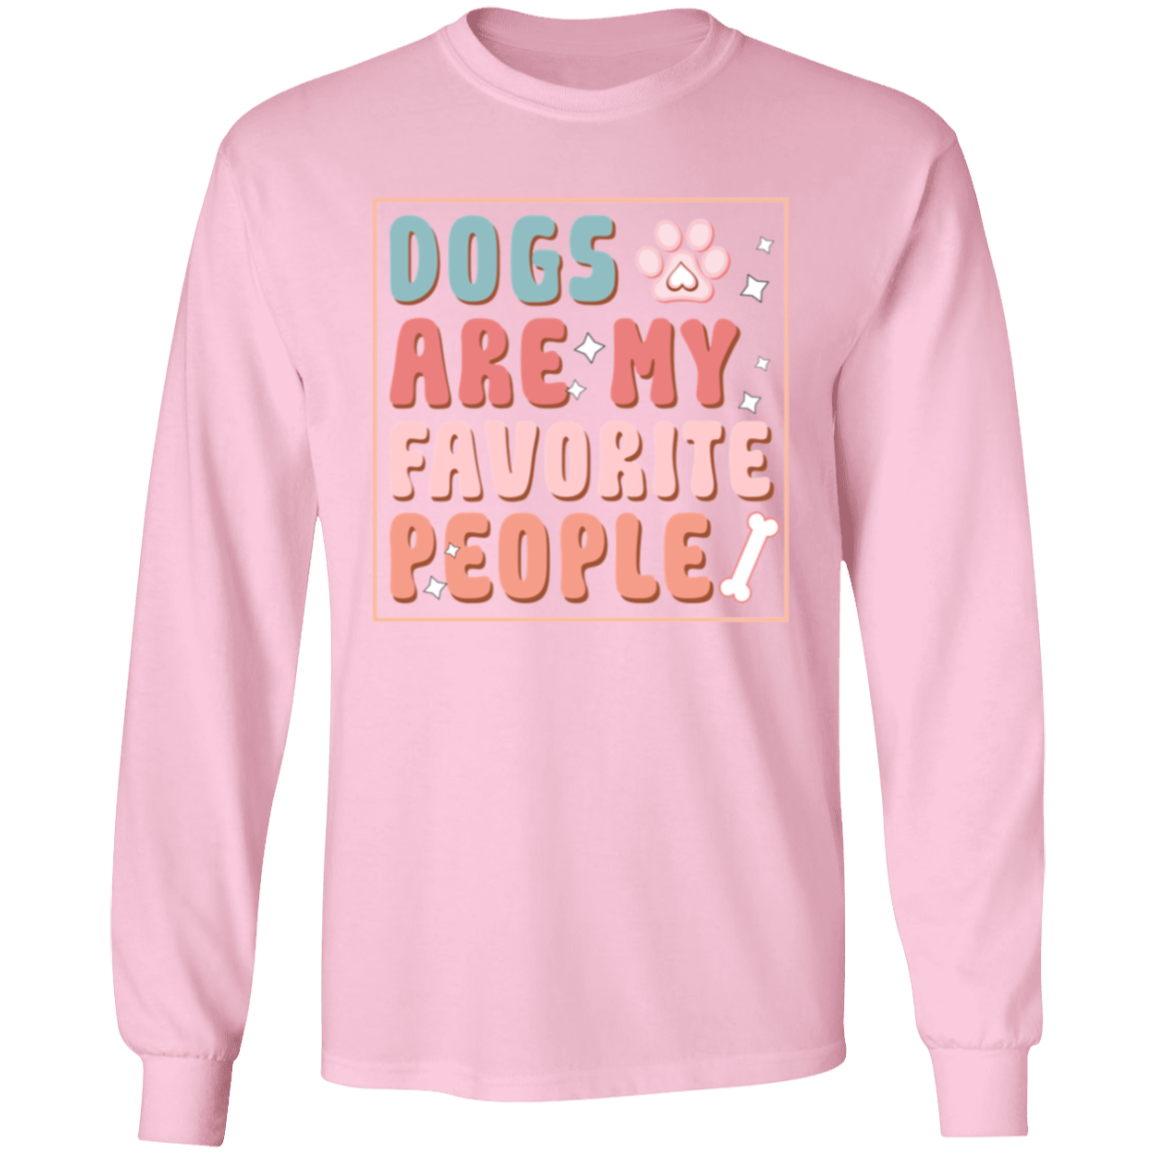 Dogs are My Favorite People Long Sleeve T-Shirt